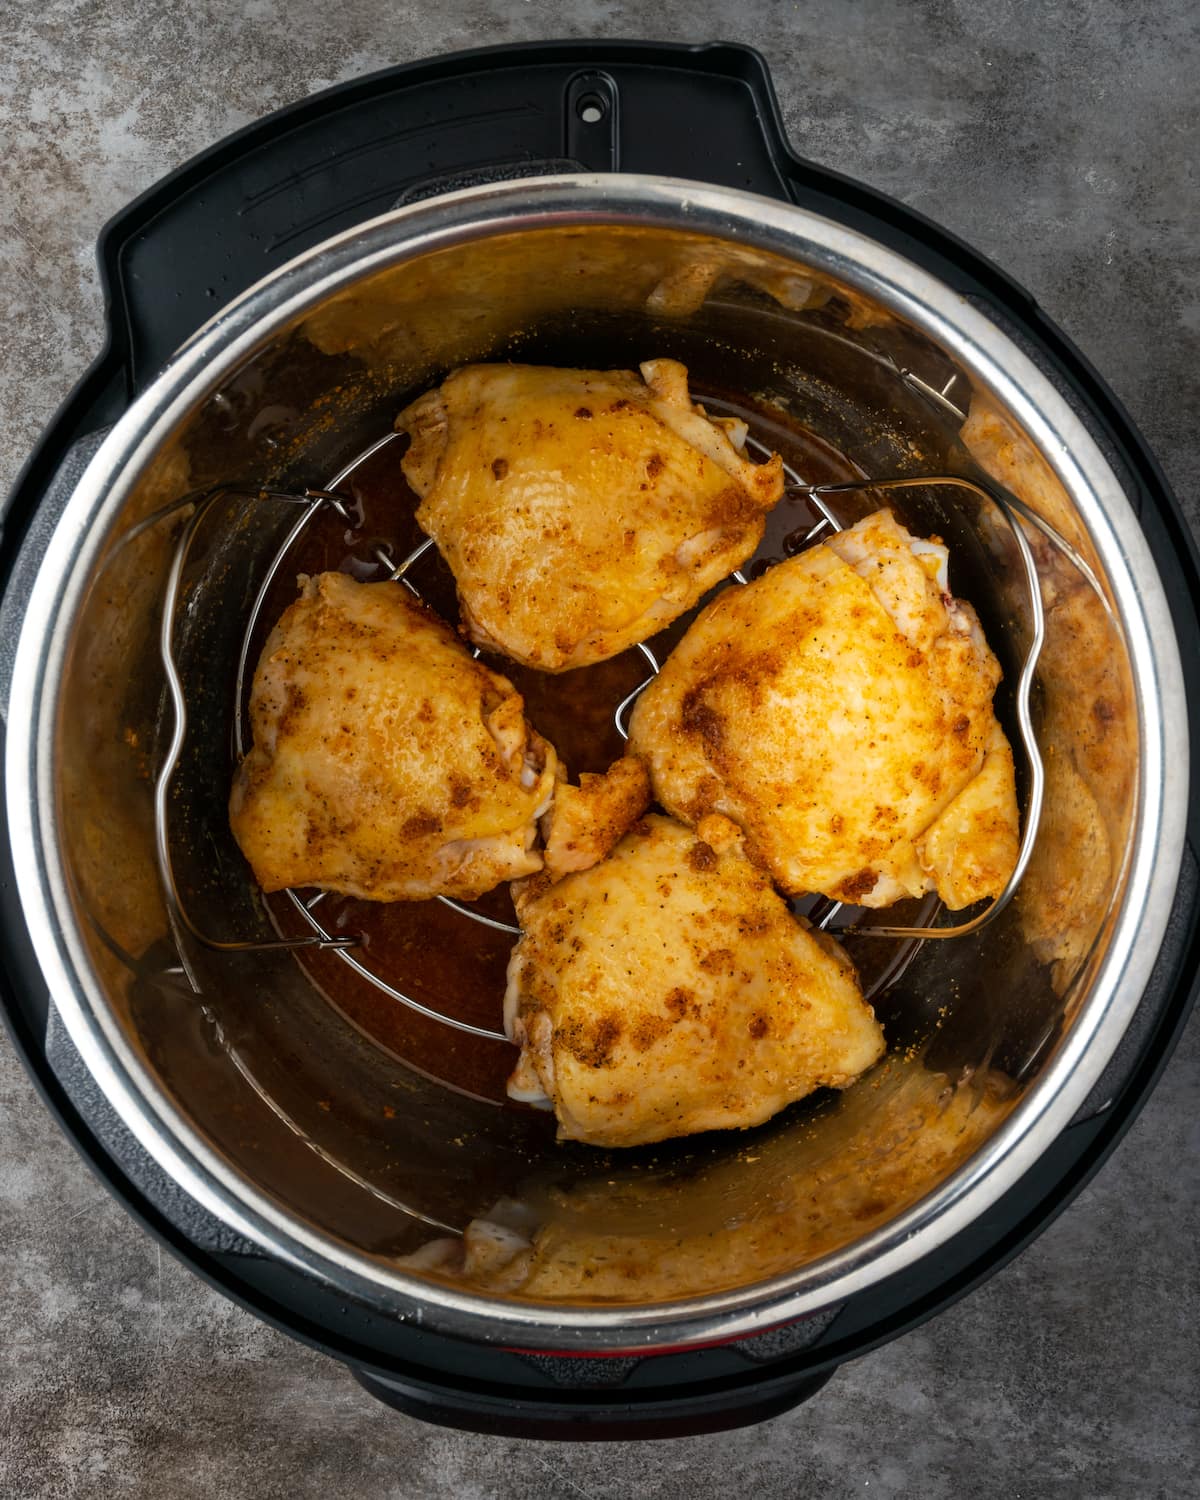 Chicken breasts on a trivet inside the instant pot, overtop of the broth.